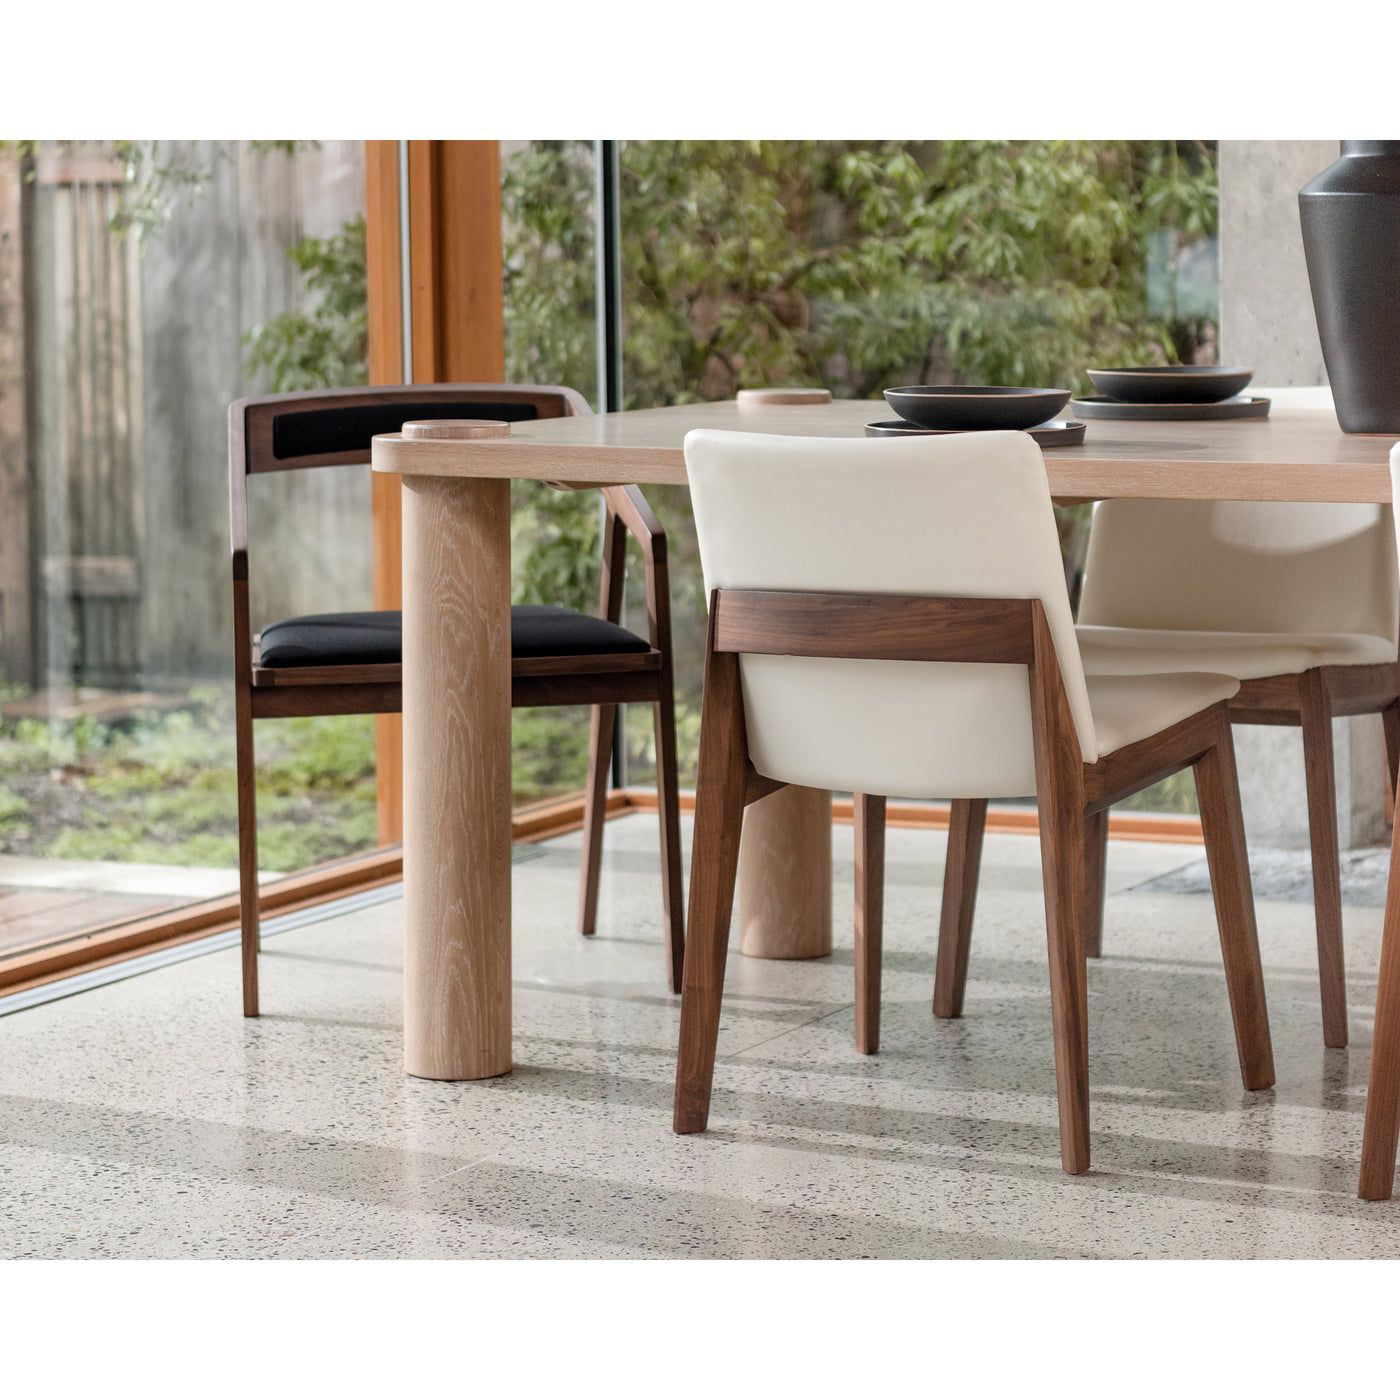 To seat our profound desire to gather together. Perfect for an open-plan kitchen or dining room with spacious seating for ...